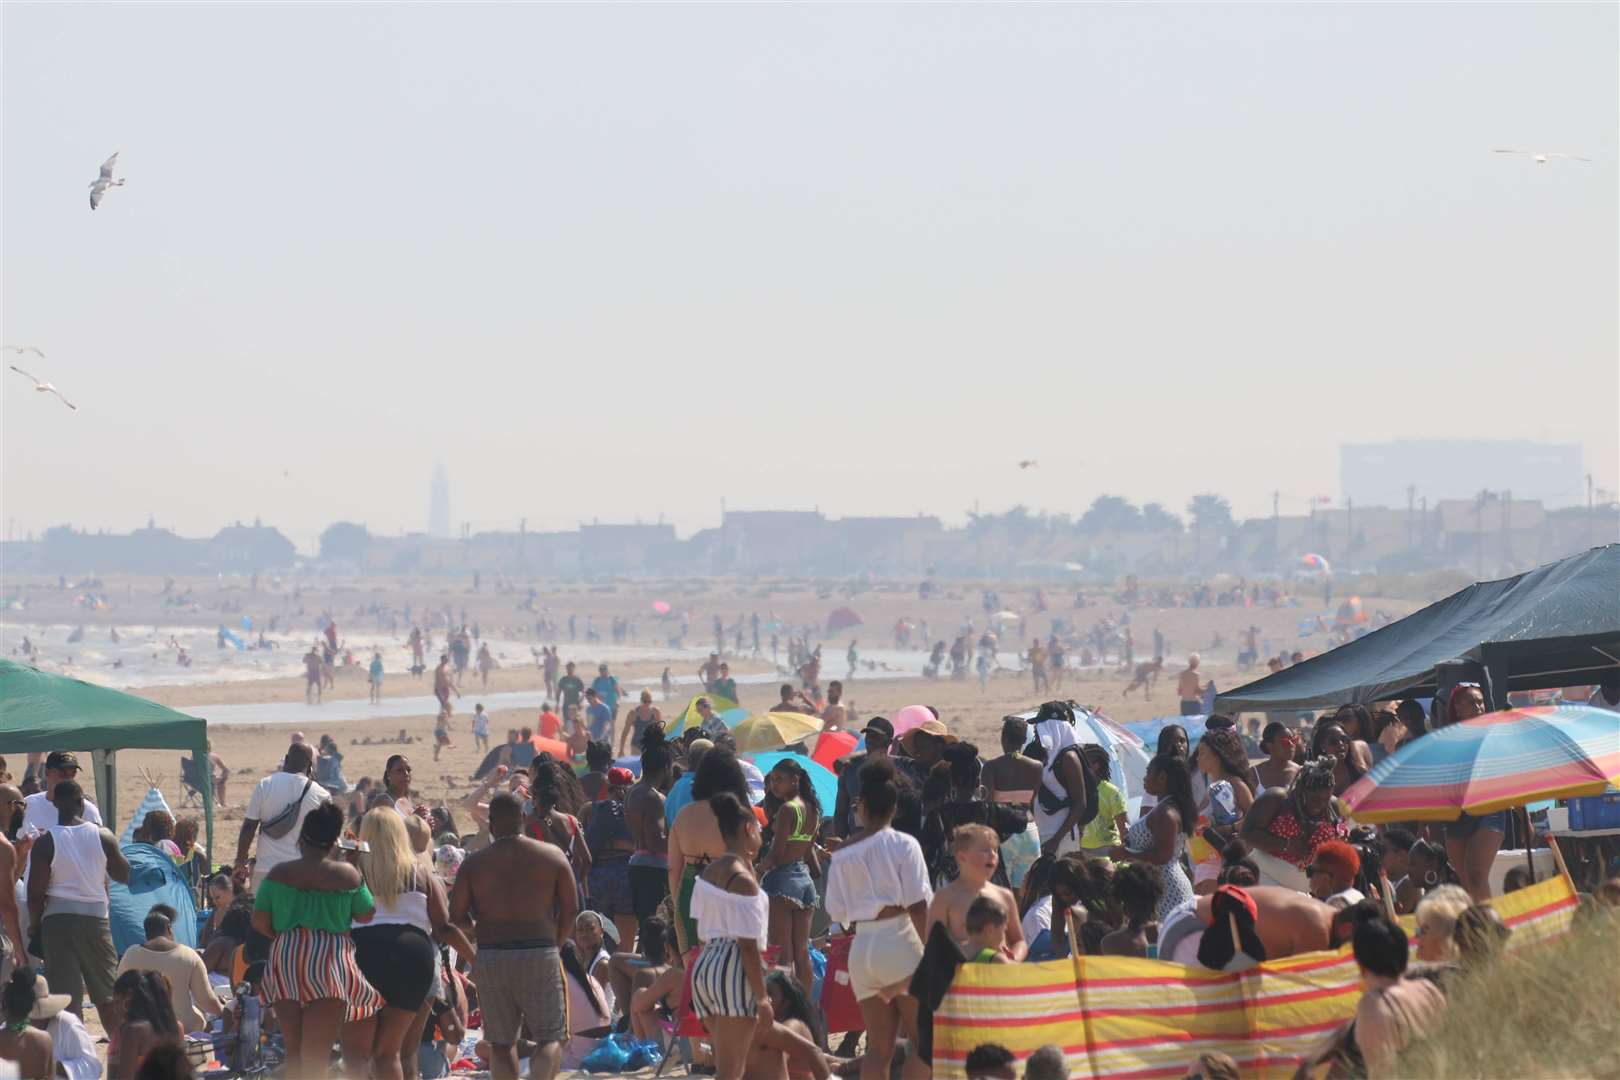 Revellers took to Greatstone Beach as part of a pre-planned 'beach cookout' held earlier this month